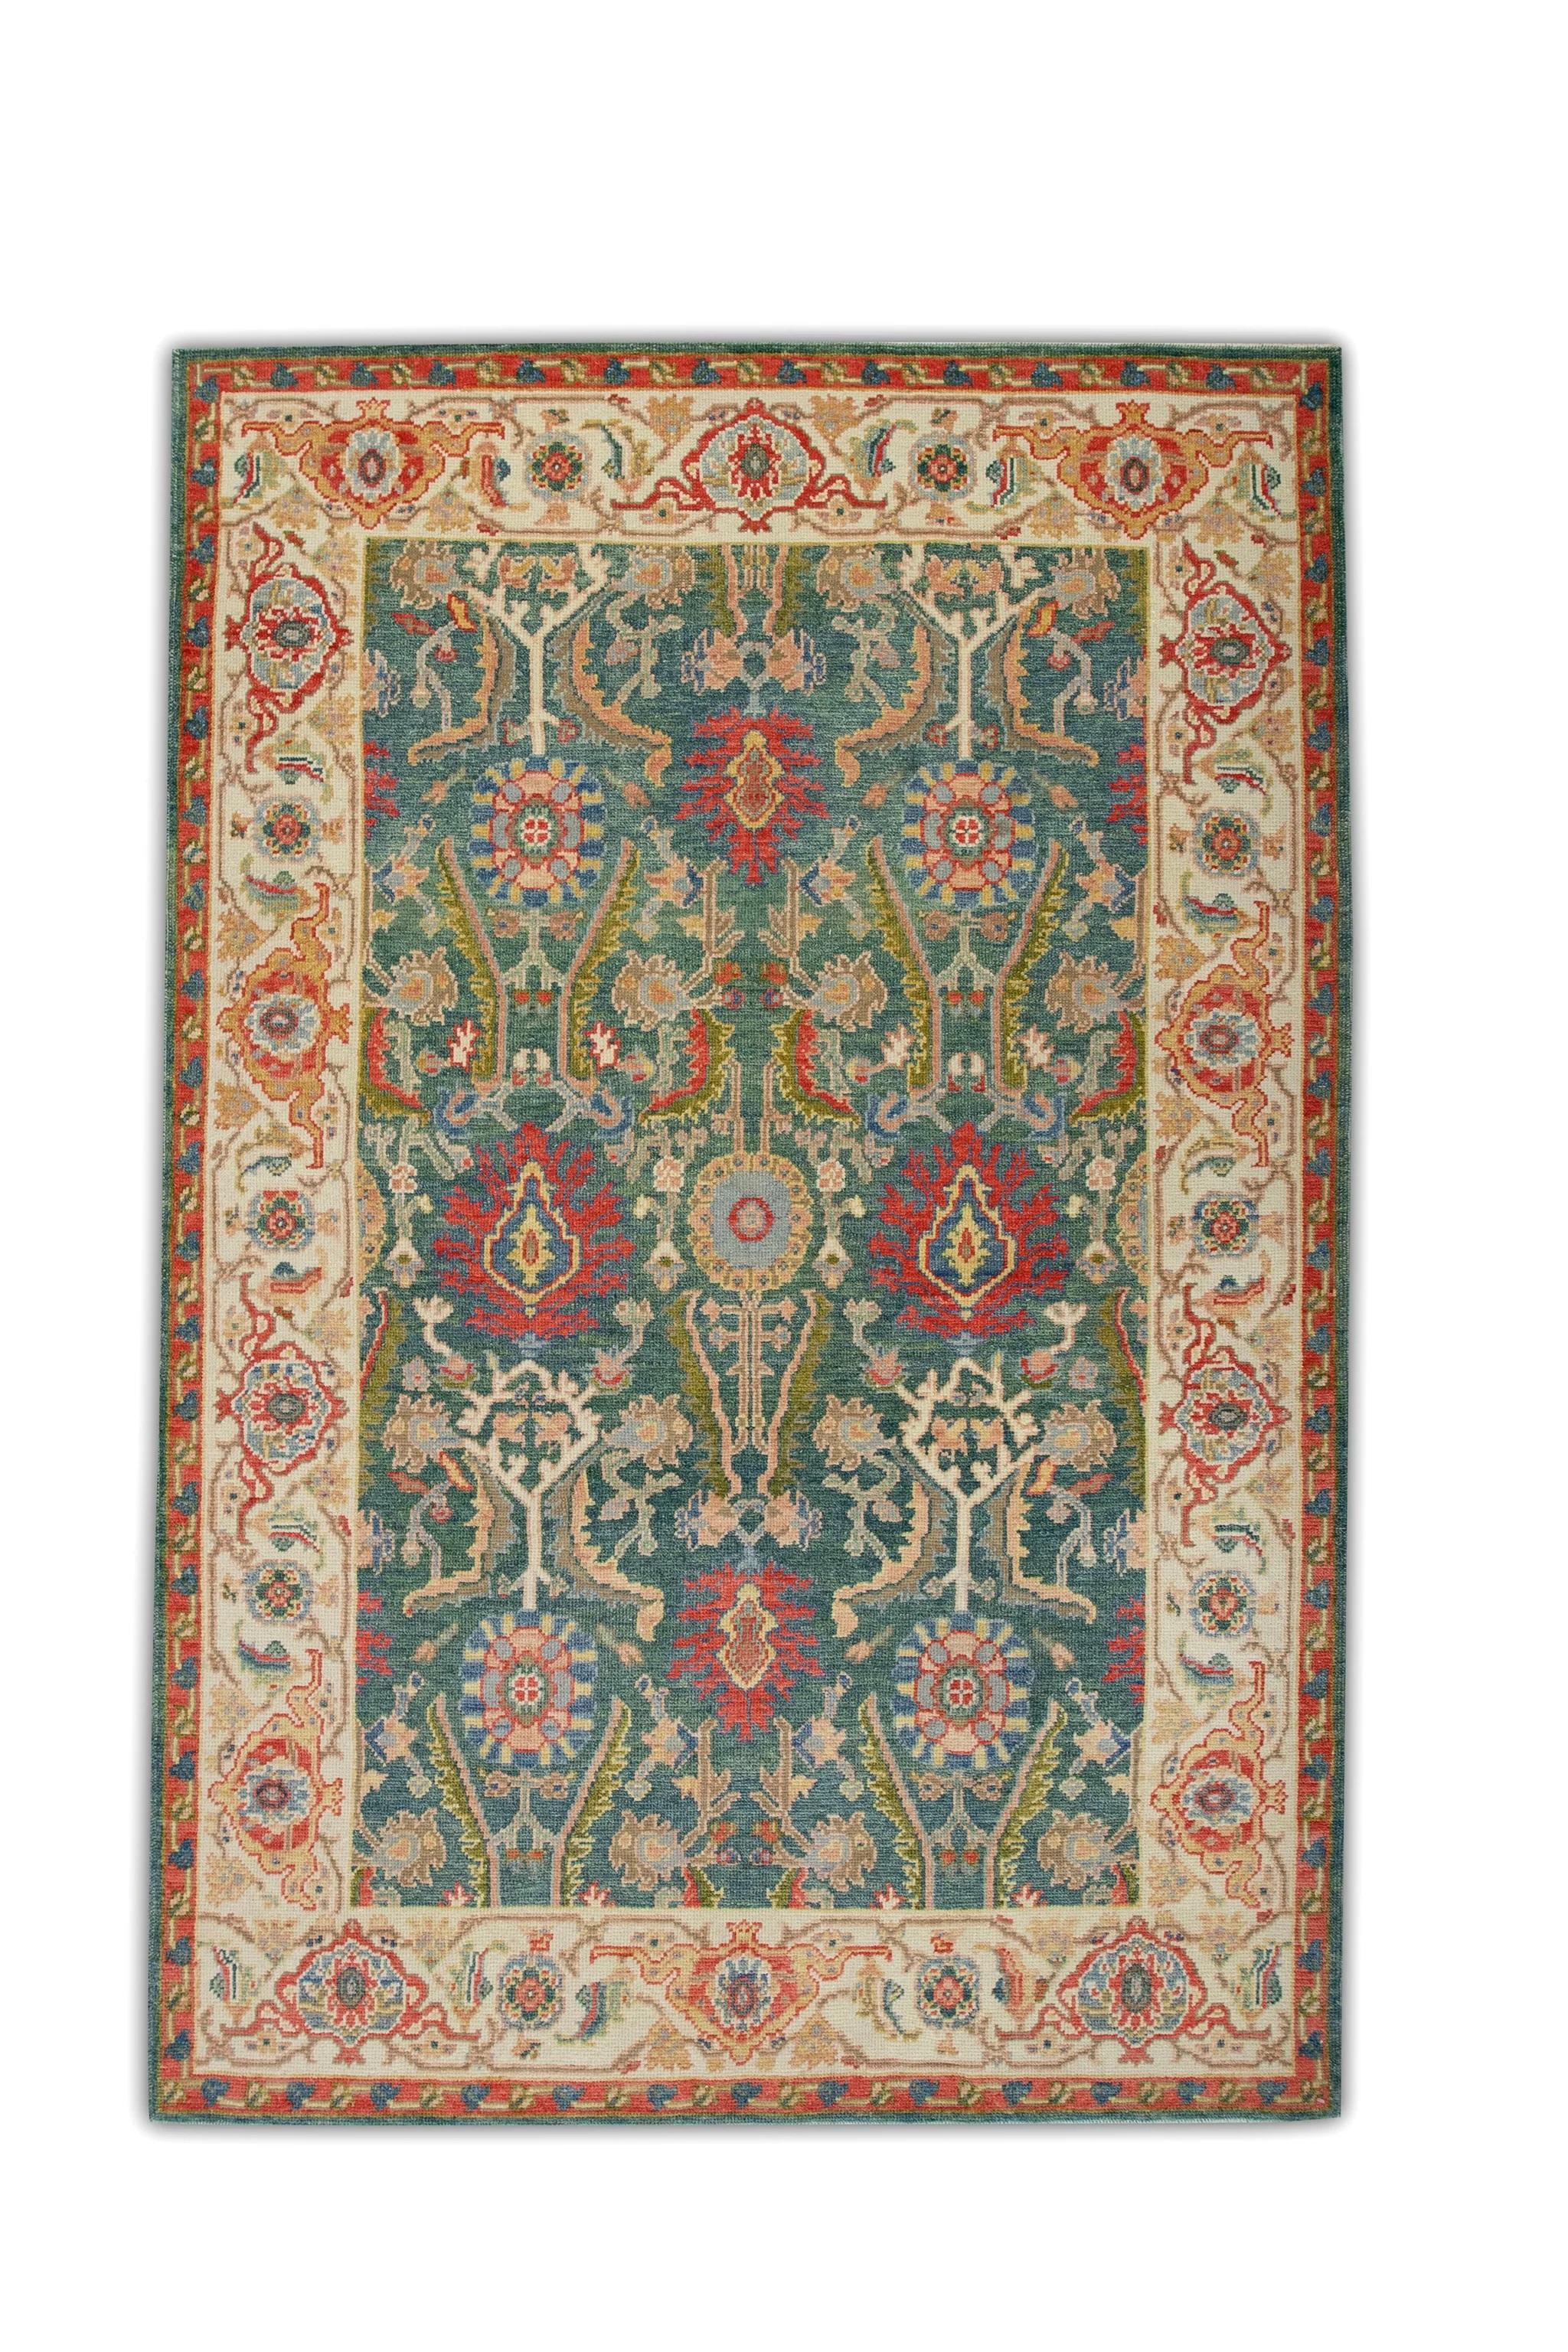 Green & Red Floral Design Handwoven Wool Turkish Finewoven Oushak Rug 4'3 x 6'7 For Sale 1